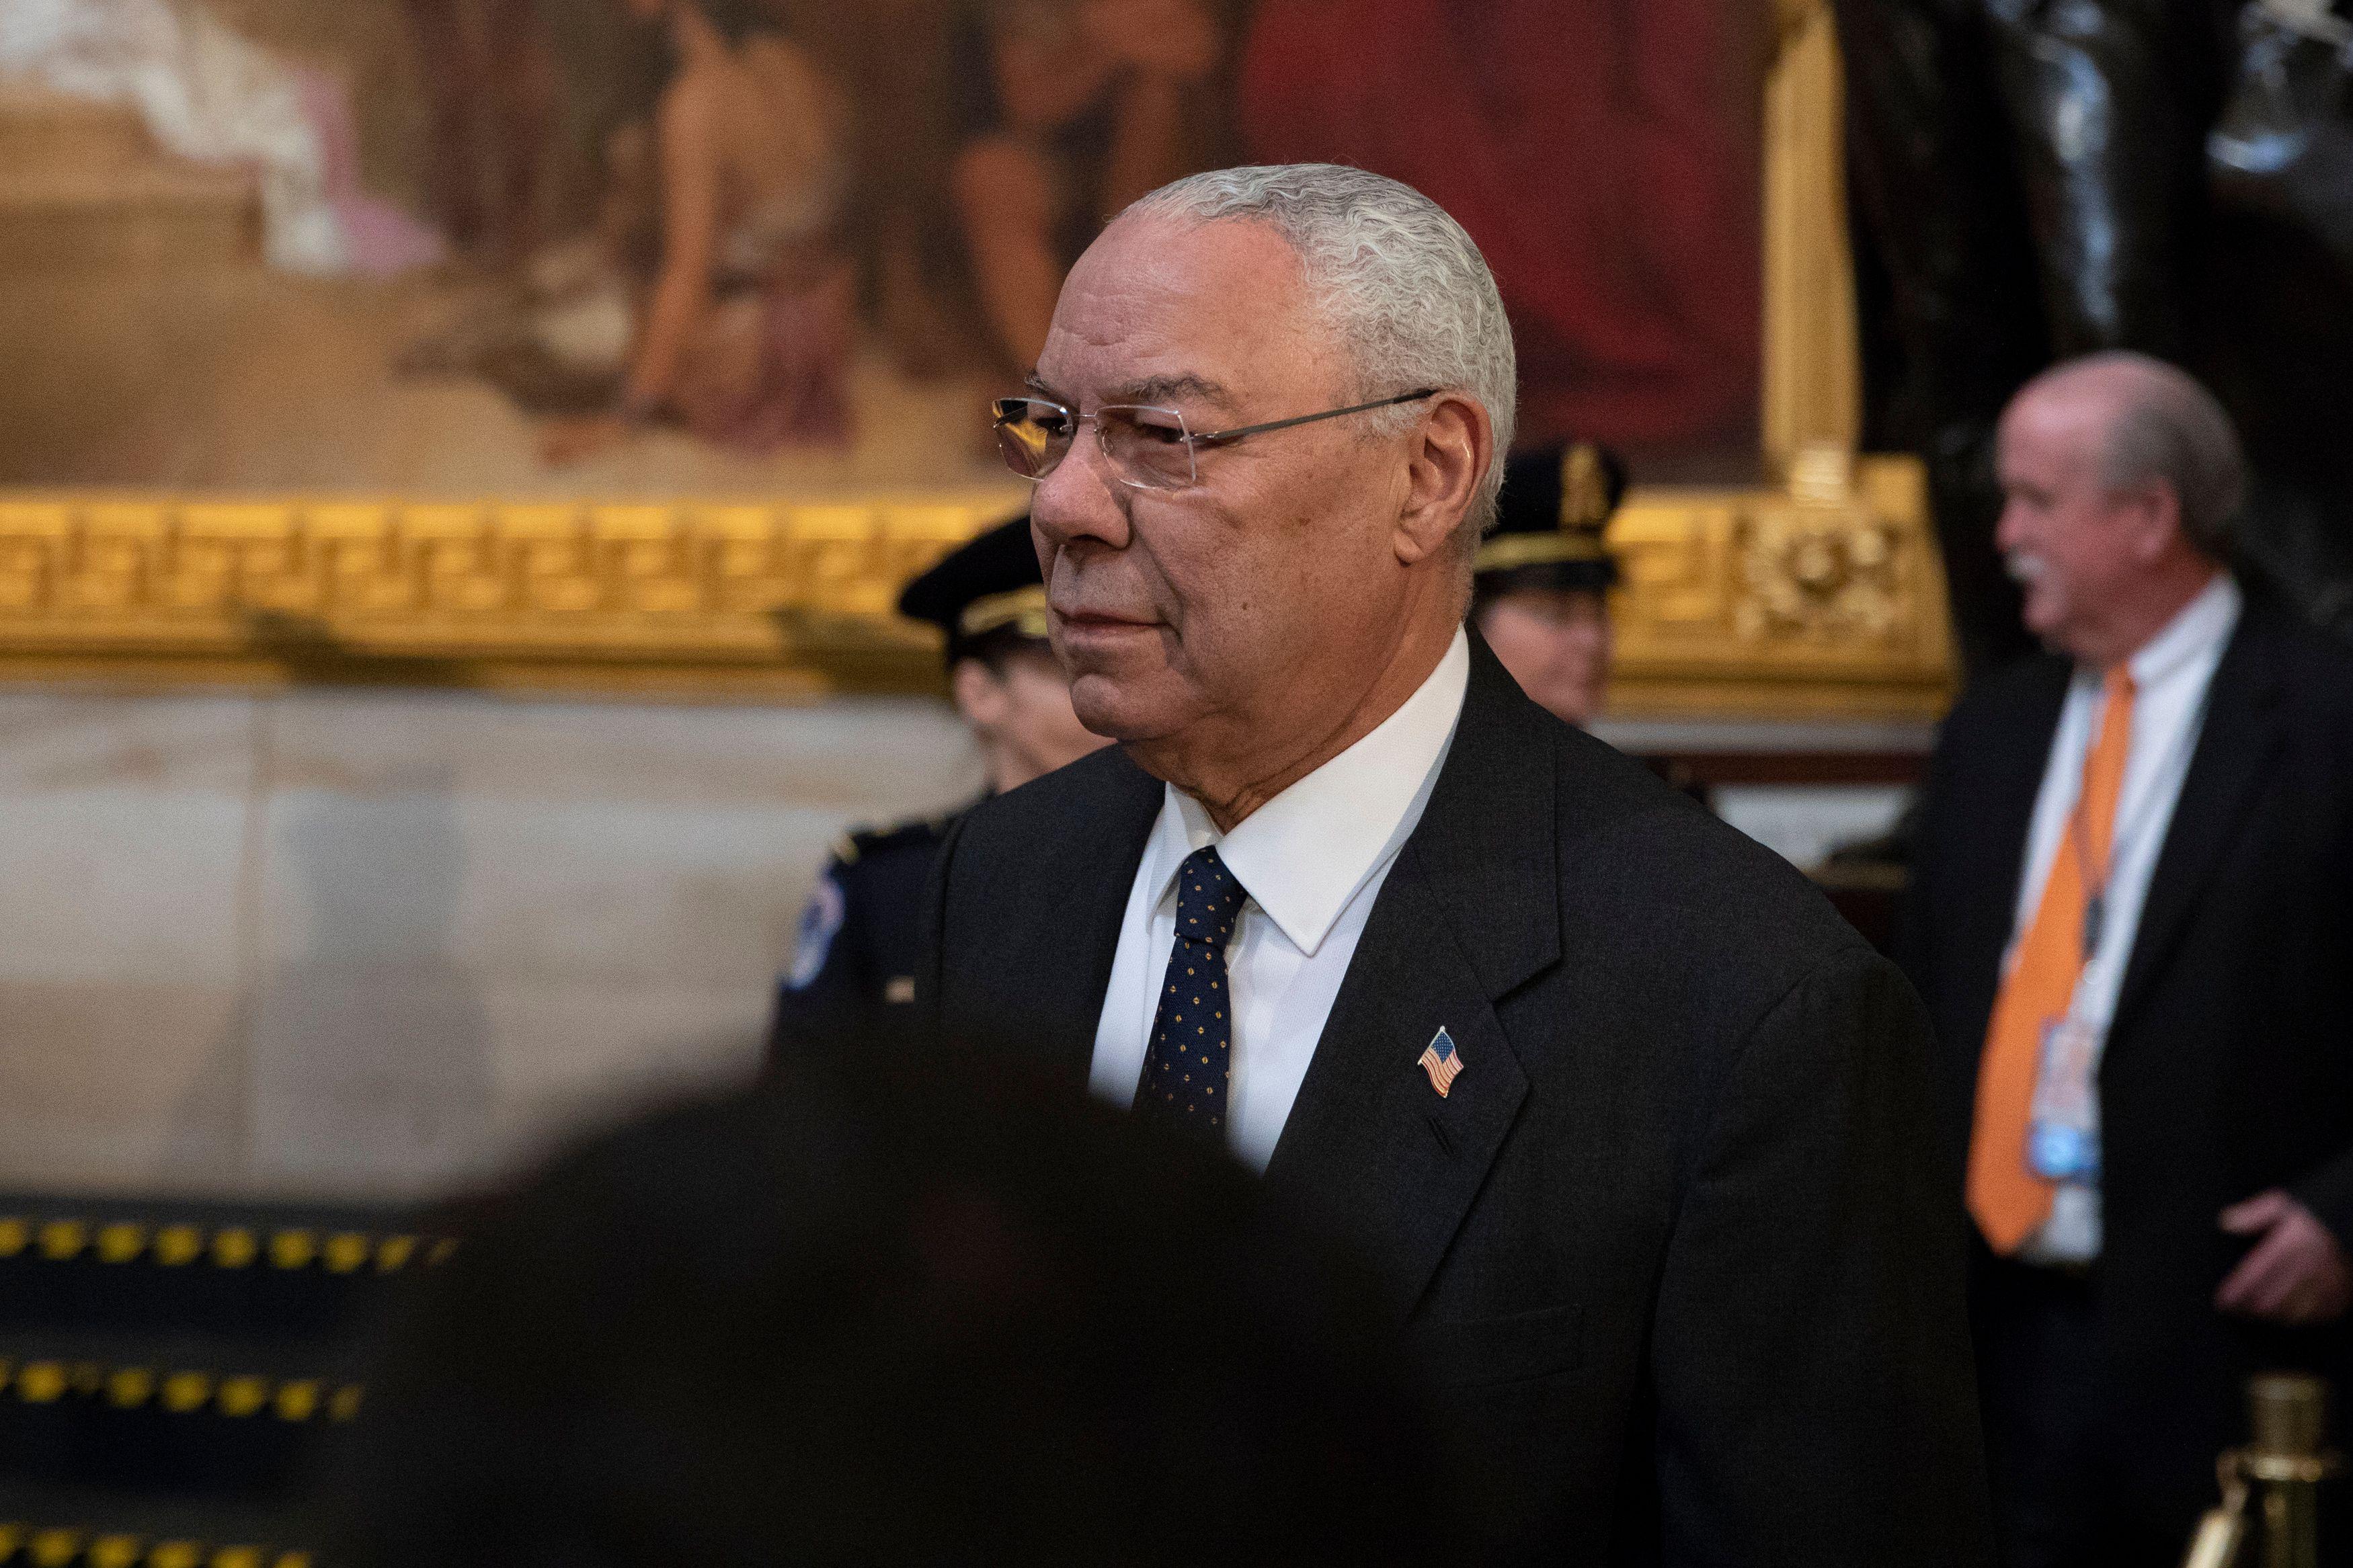 Colin Powell, with a painting and a security guard in the background